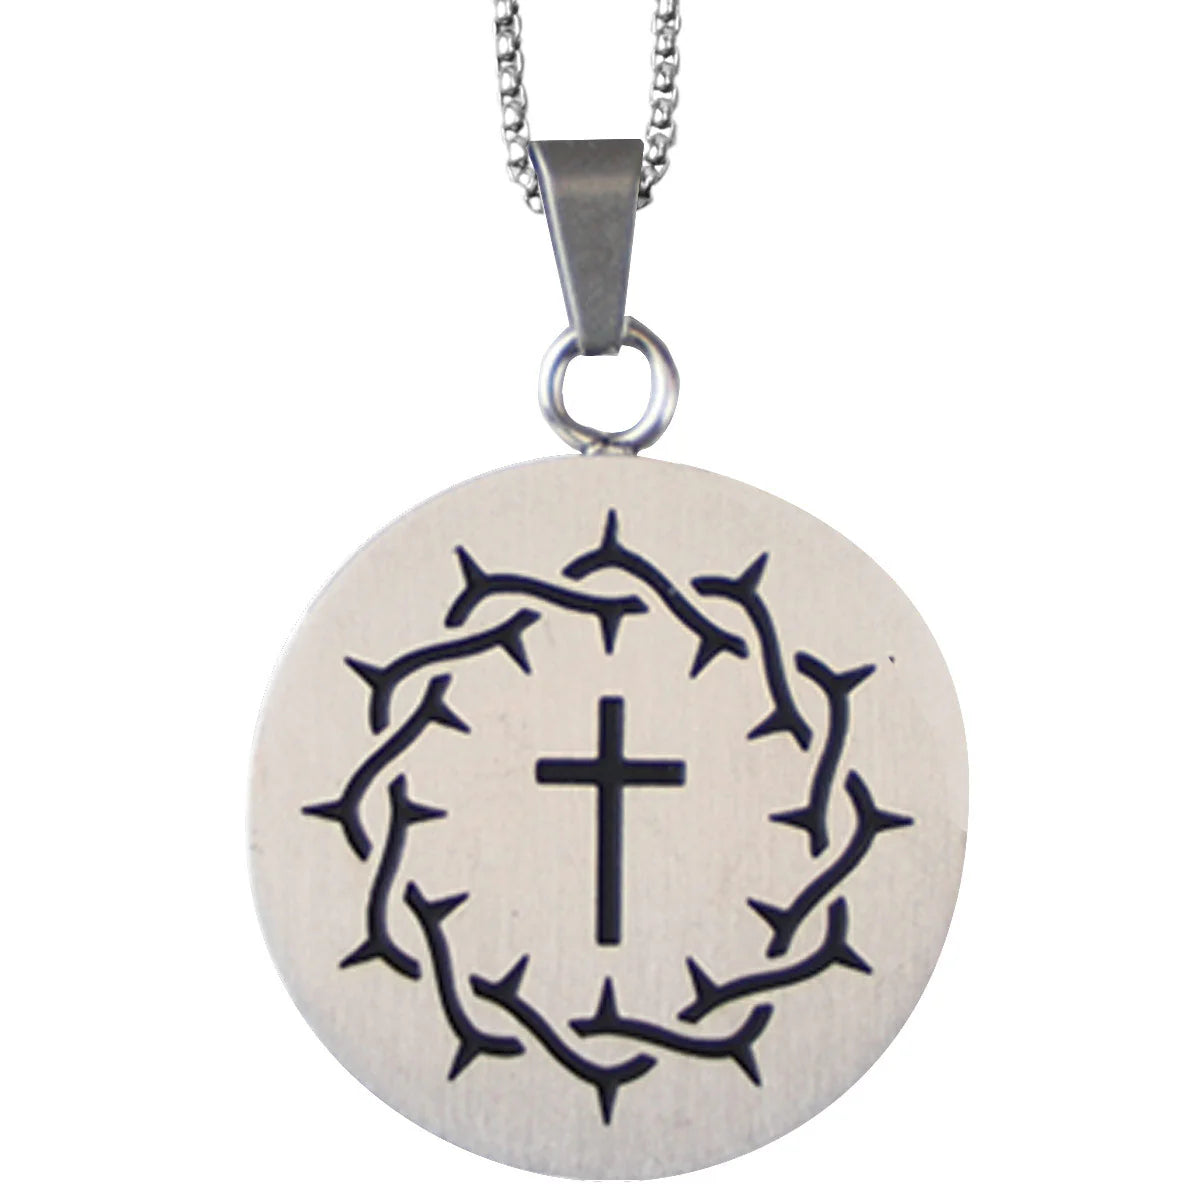 Kerusso Mens Necklace Crown Cross Kerusso® accessories jewelry Mens New